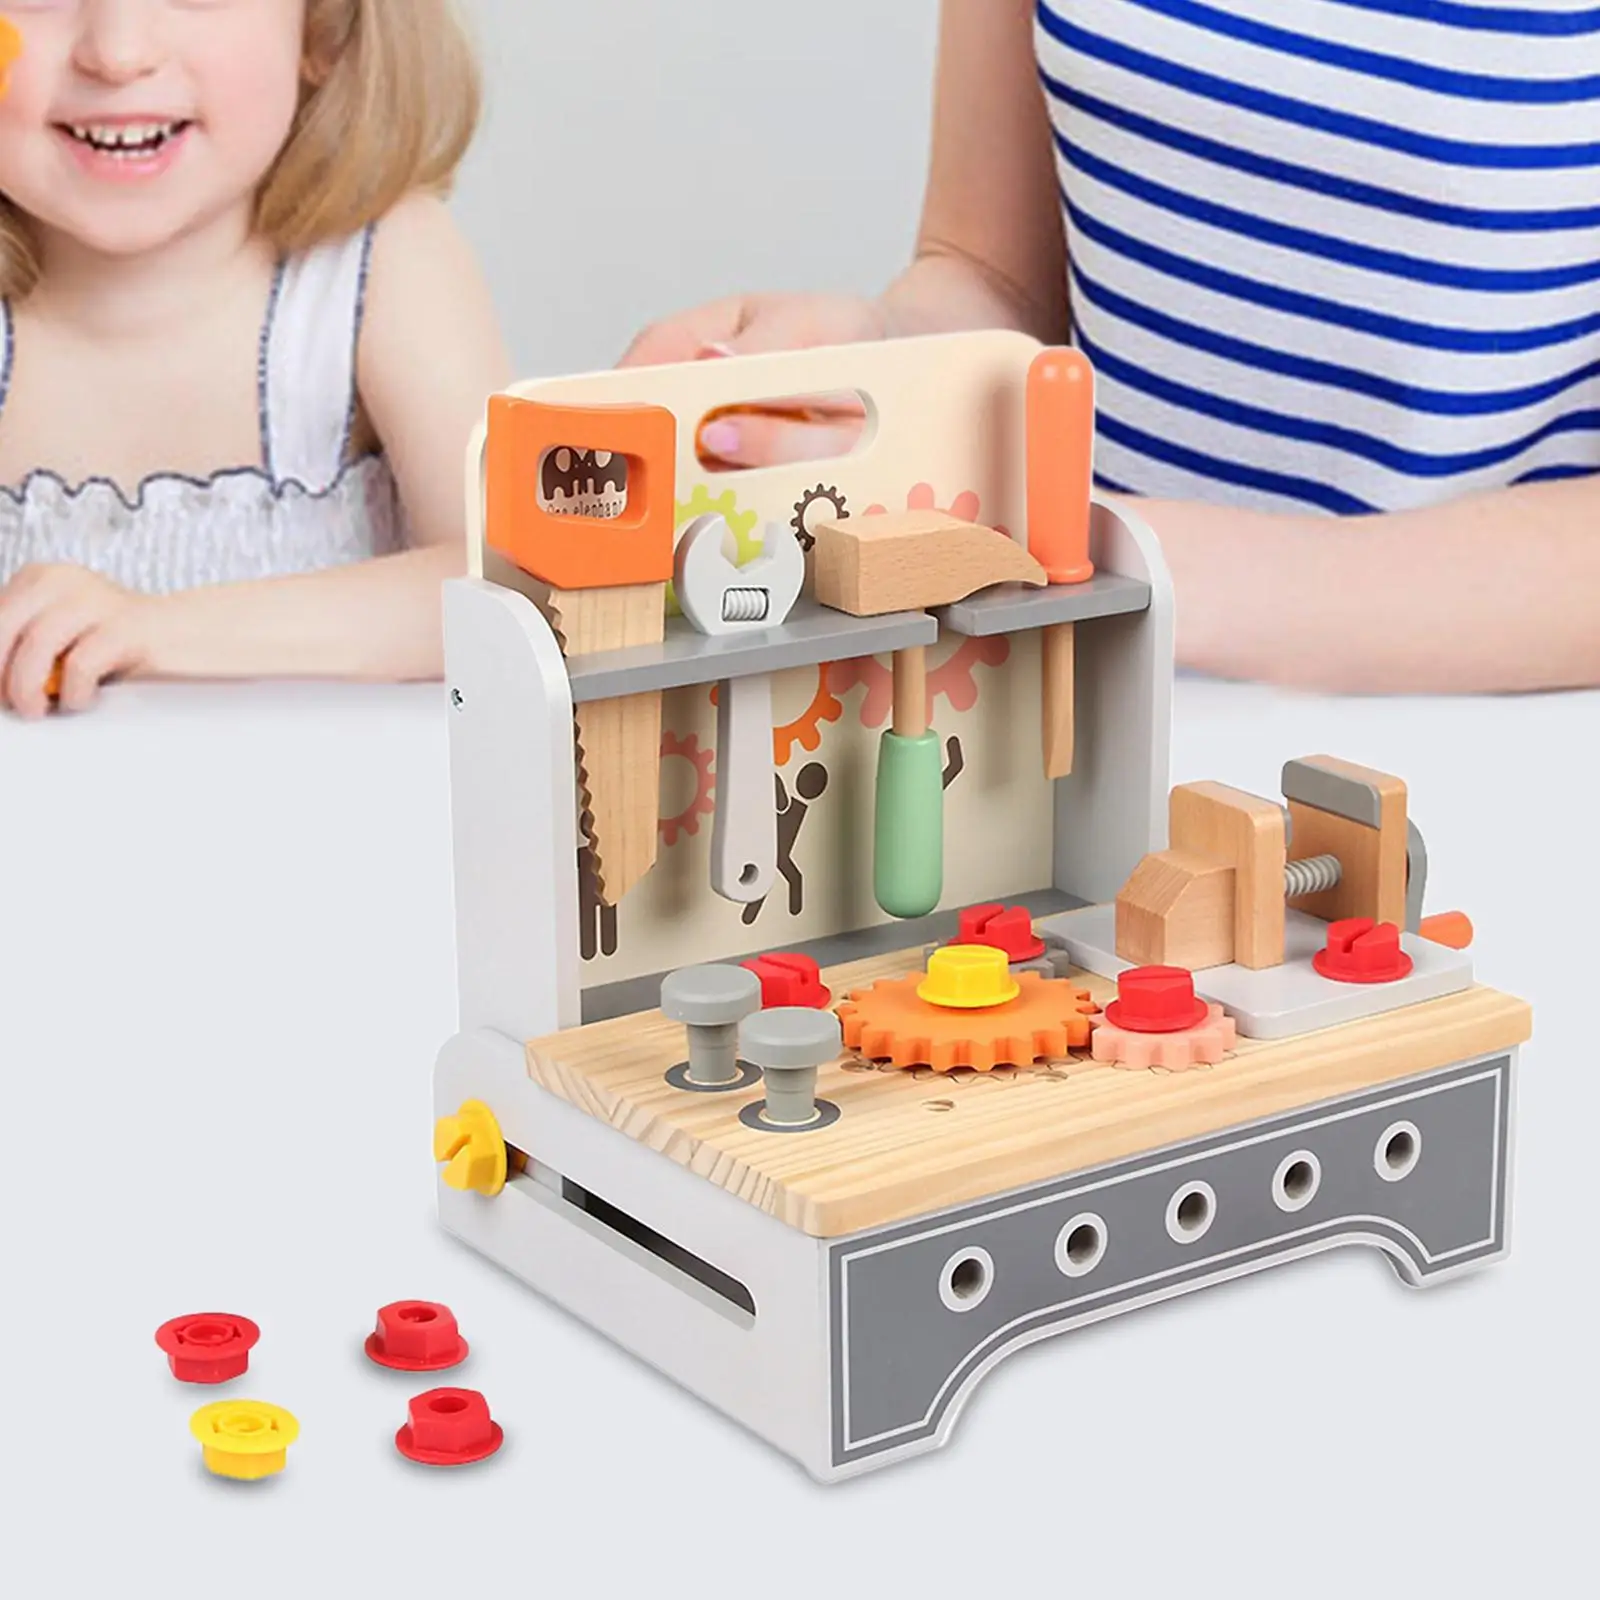 Repair Tool Pretend Play Educational Toys Toy for Indoor Children